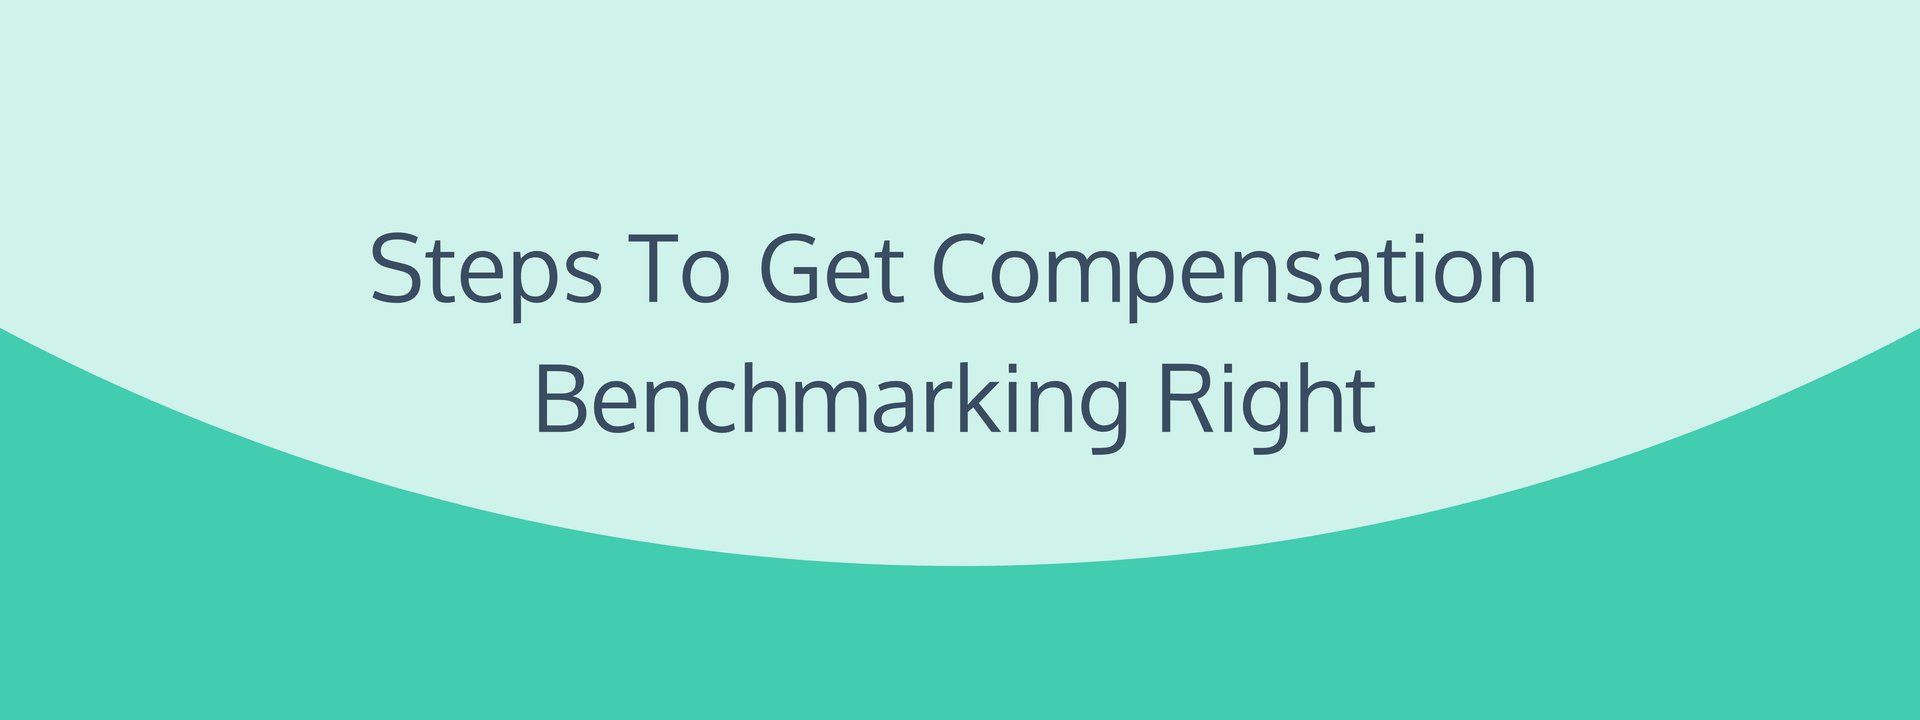 Steps To Get Compensation Benchmarking Right